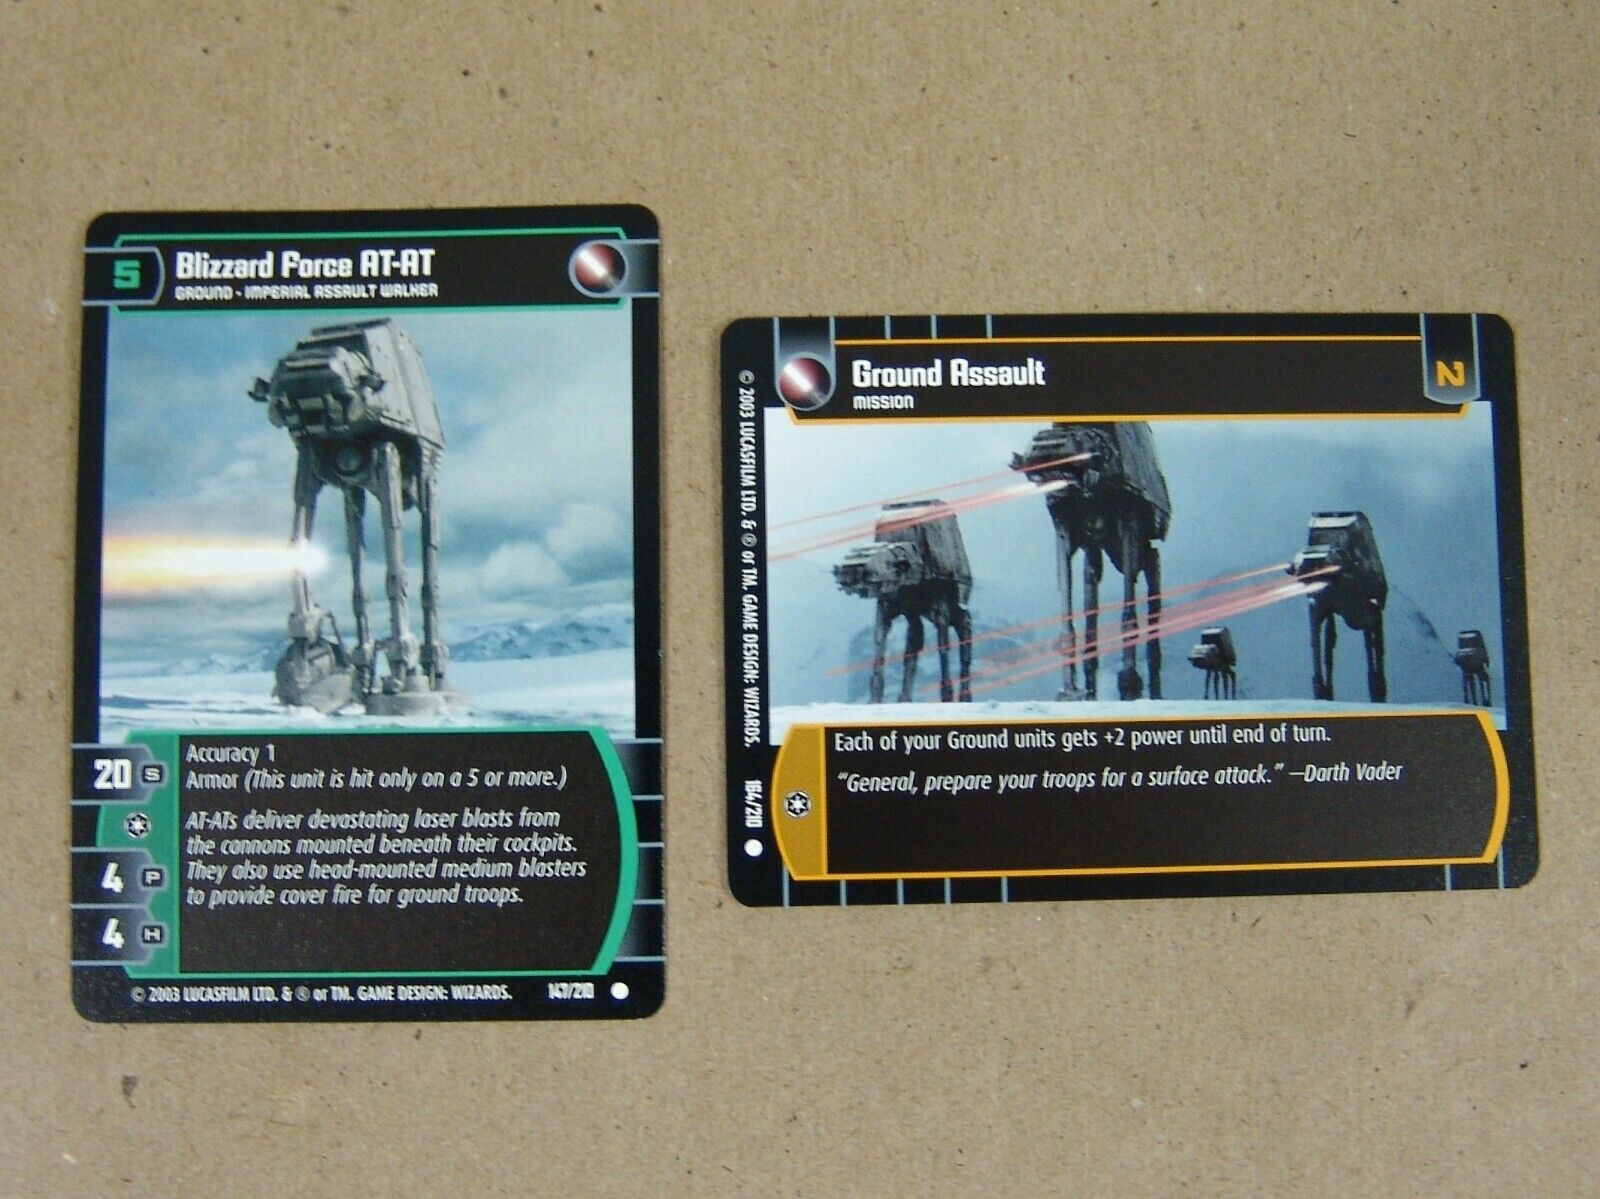 2003 WOTC Star Wars TCG - Blizzard Force AT-AT #147 & Ground Assault #164 - ESB